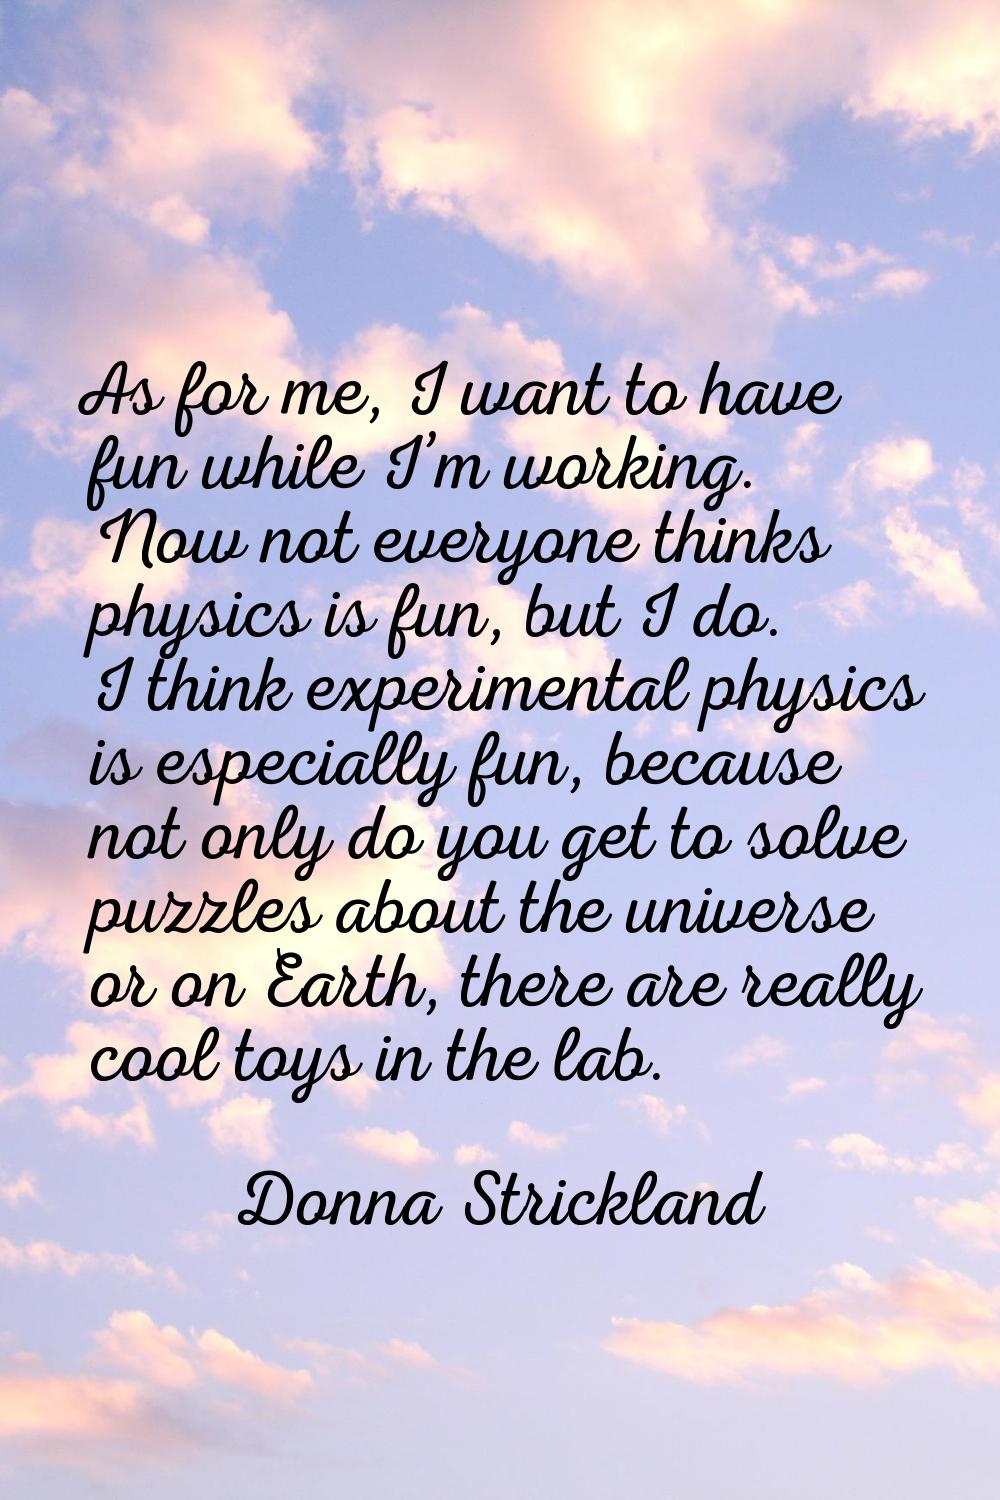 As for me, I want to have fun while I’m working. Now not everyone thinks physics is fun, but I do. 